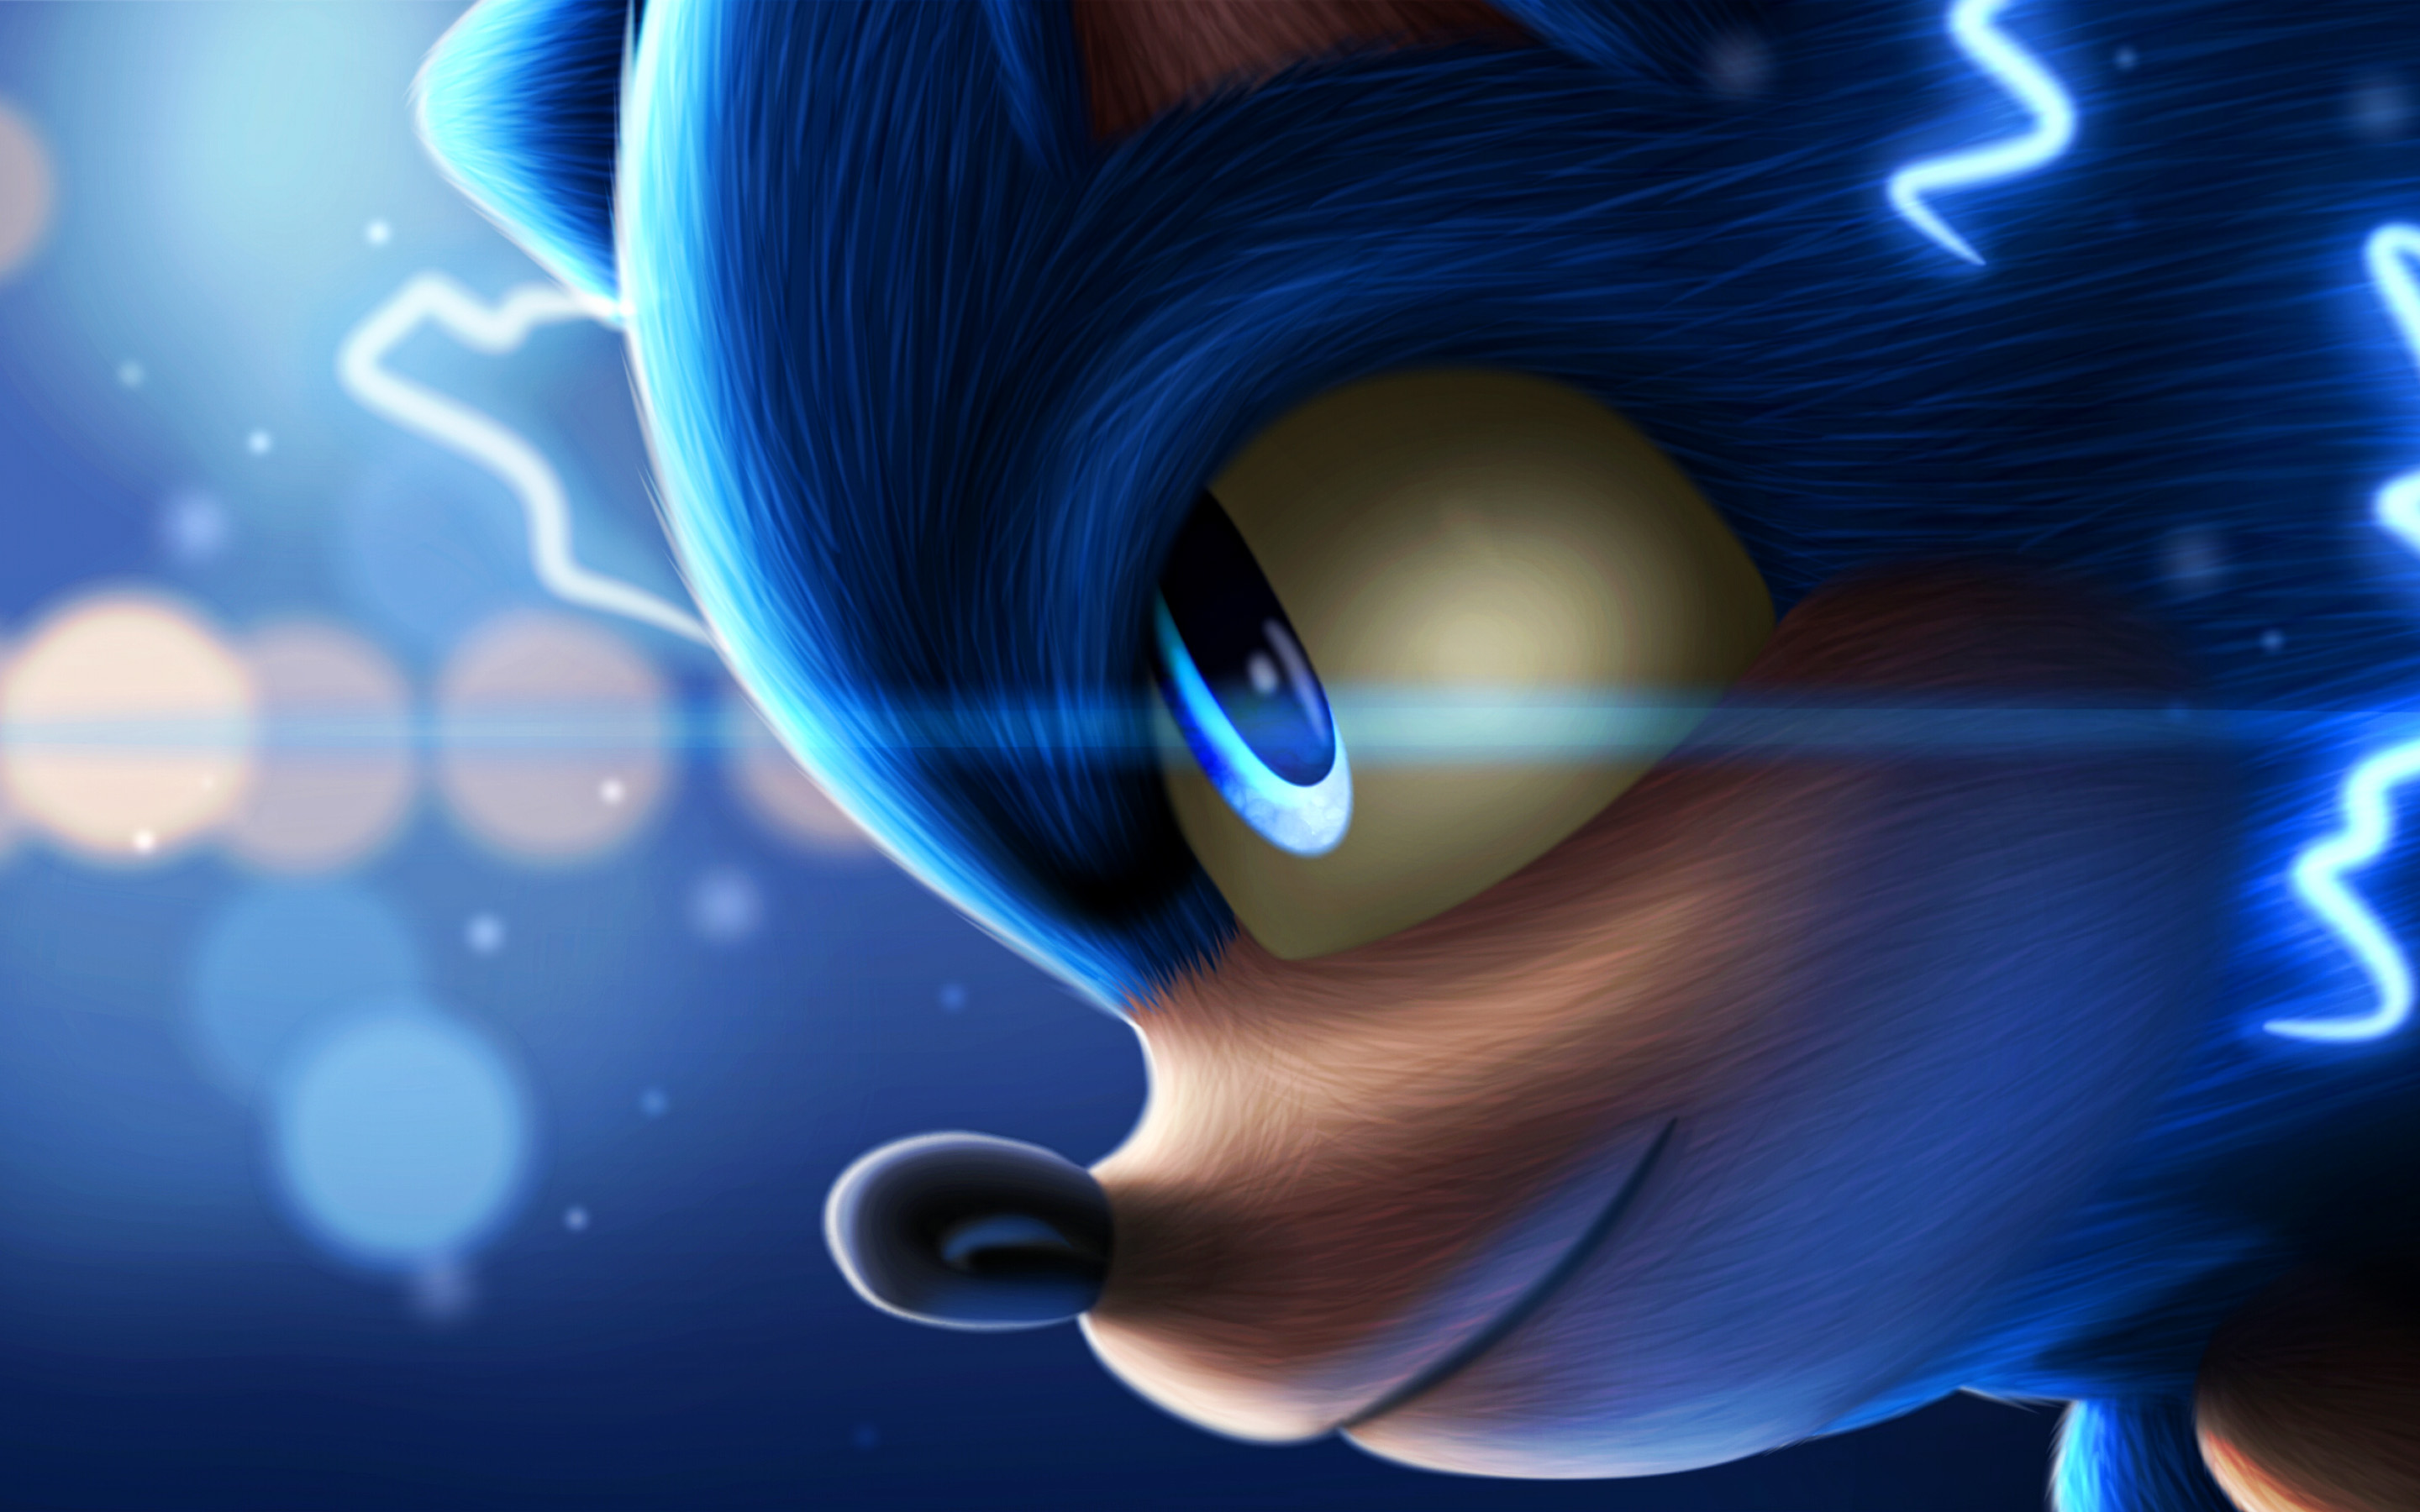 Sonic, close-up, Sonic The Hedgehog, 3D art, 2020 movie, poster, Blue Sonic.